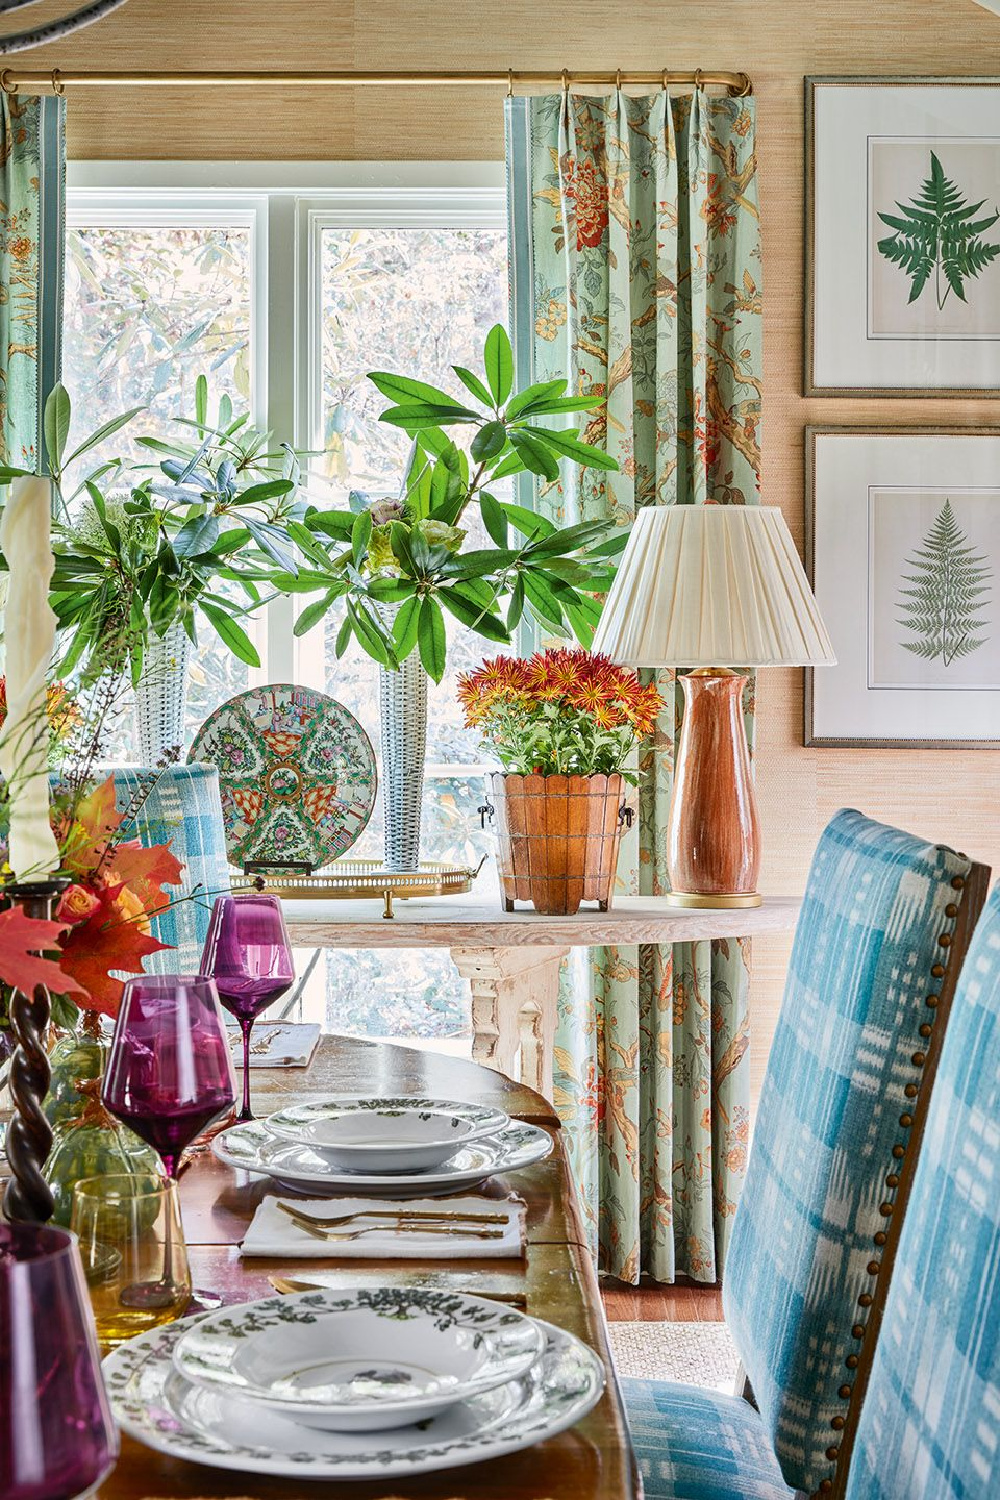 Colorful textiles and table decor in the home of James Farmer - from CELEBRATING HOME (Gibbs Smith, 2022). #southernhomeinterior #diningroom